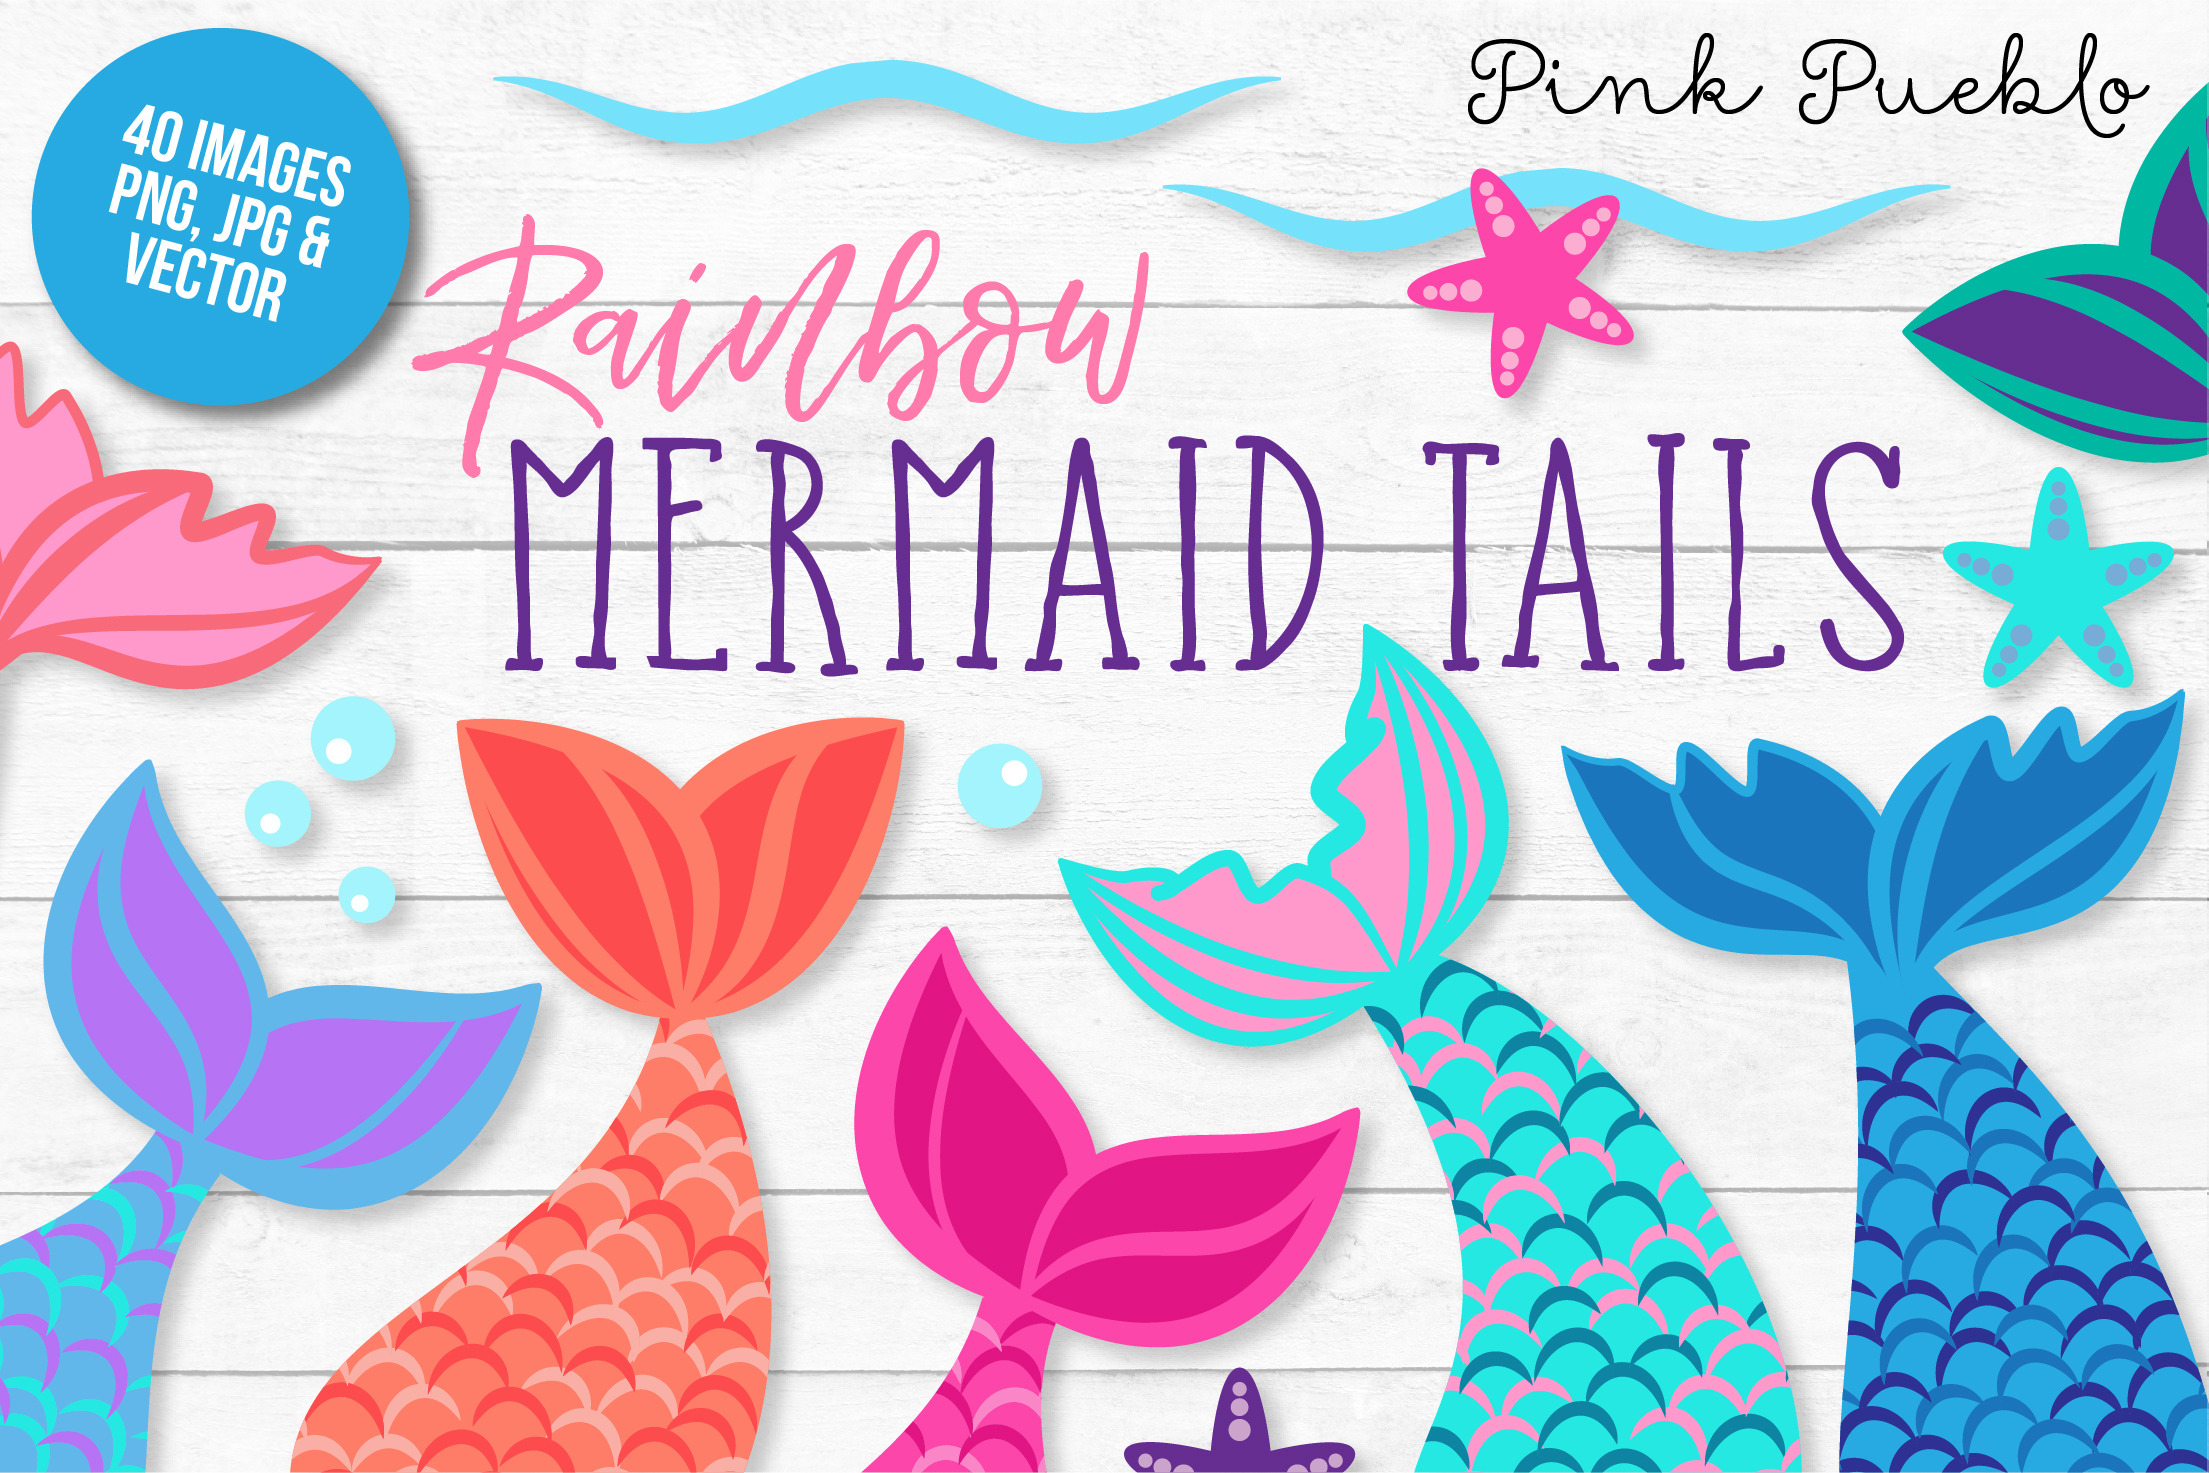 Download Mermaid Tail Clipart and Vectors ~ Illustrations ...